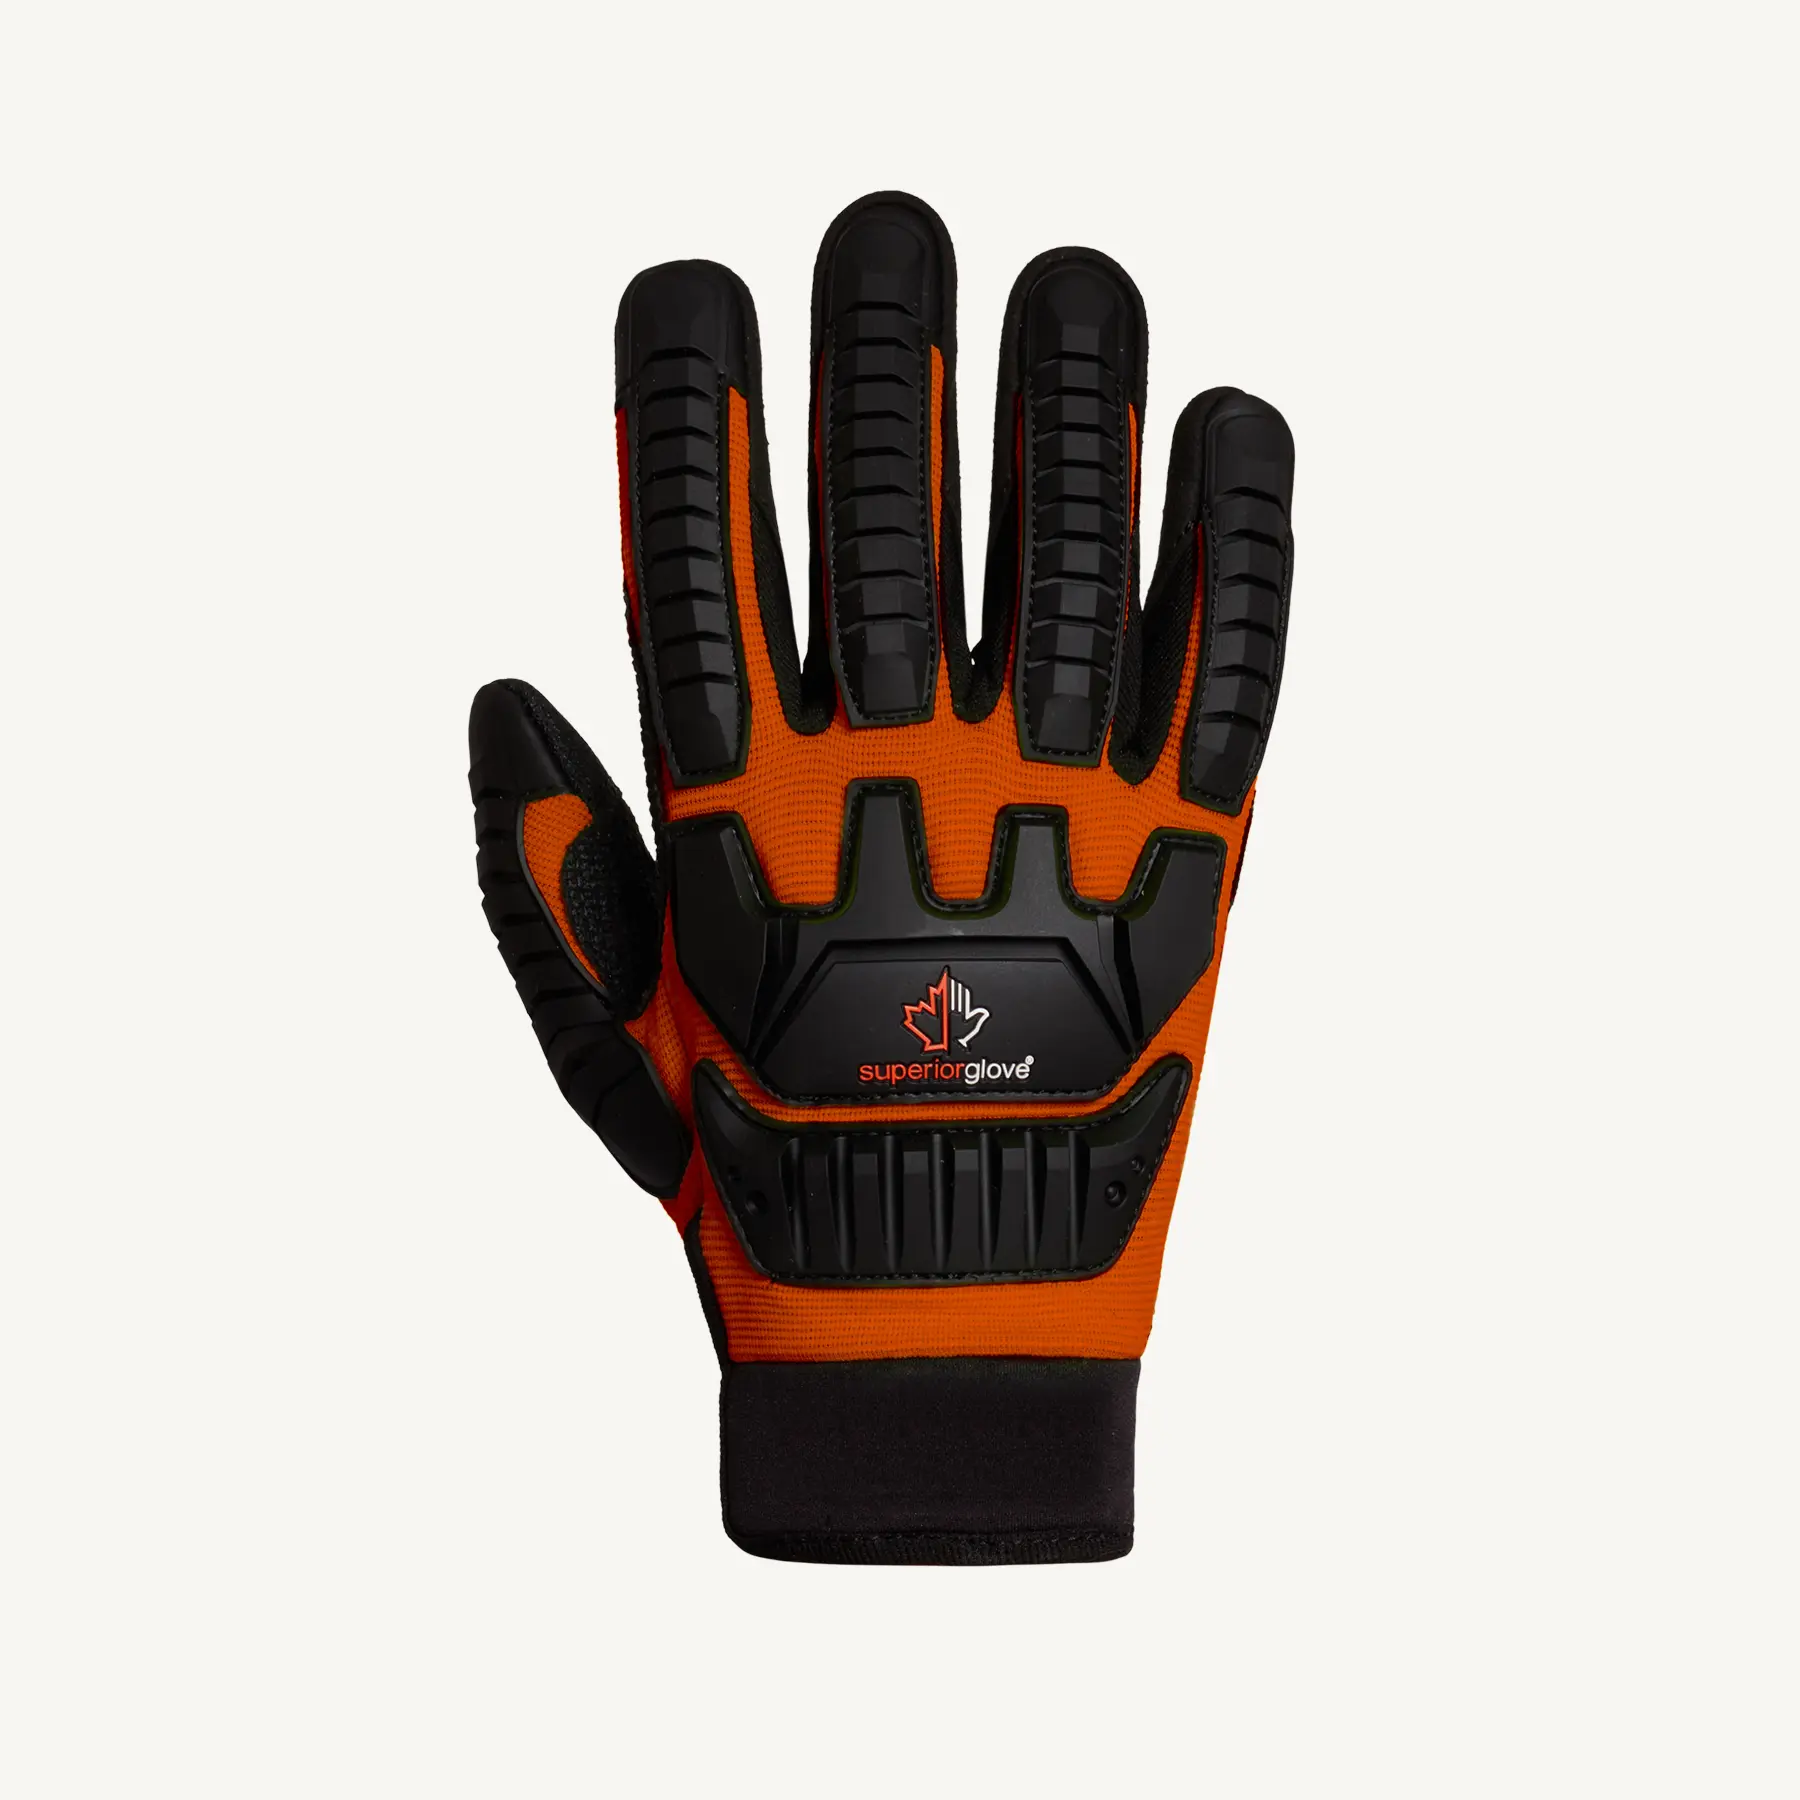 MXVSBE Superior Glove® Clutch Gear® Impact Protection Mechanics Gloves